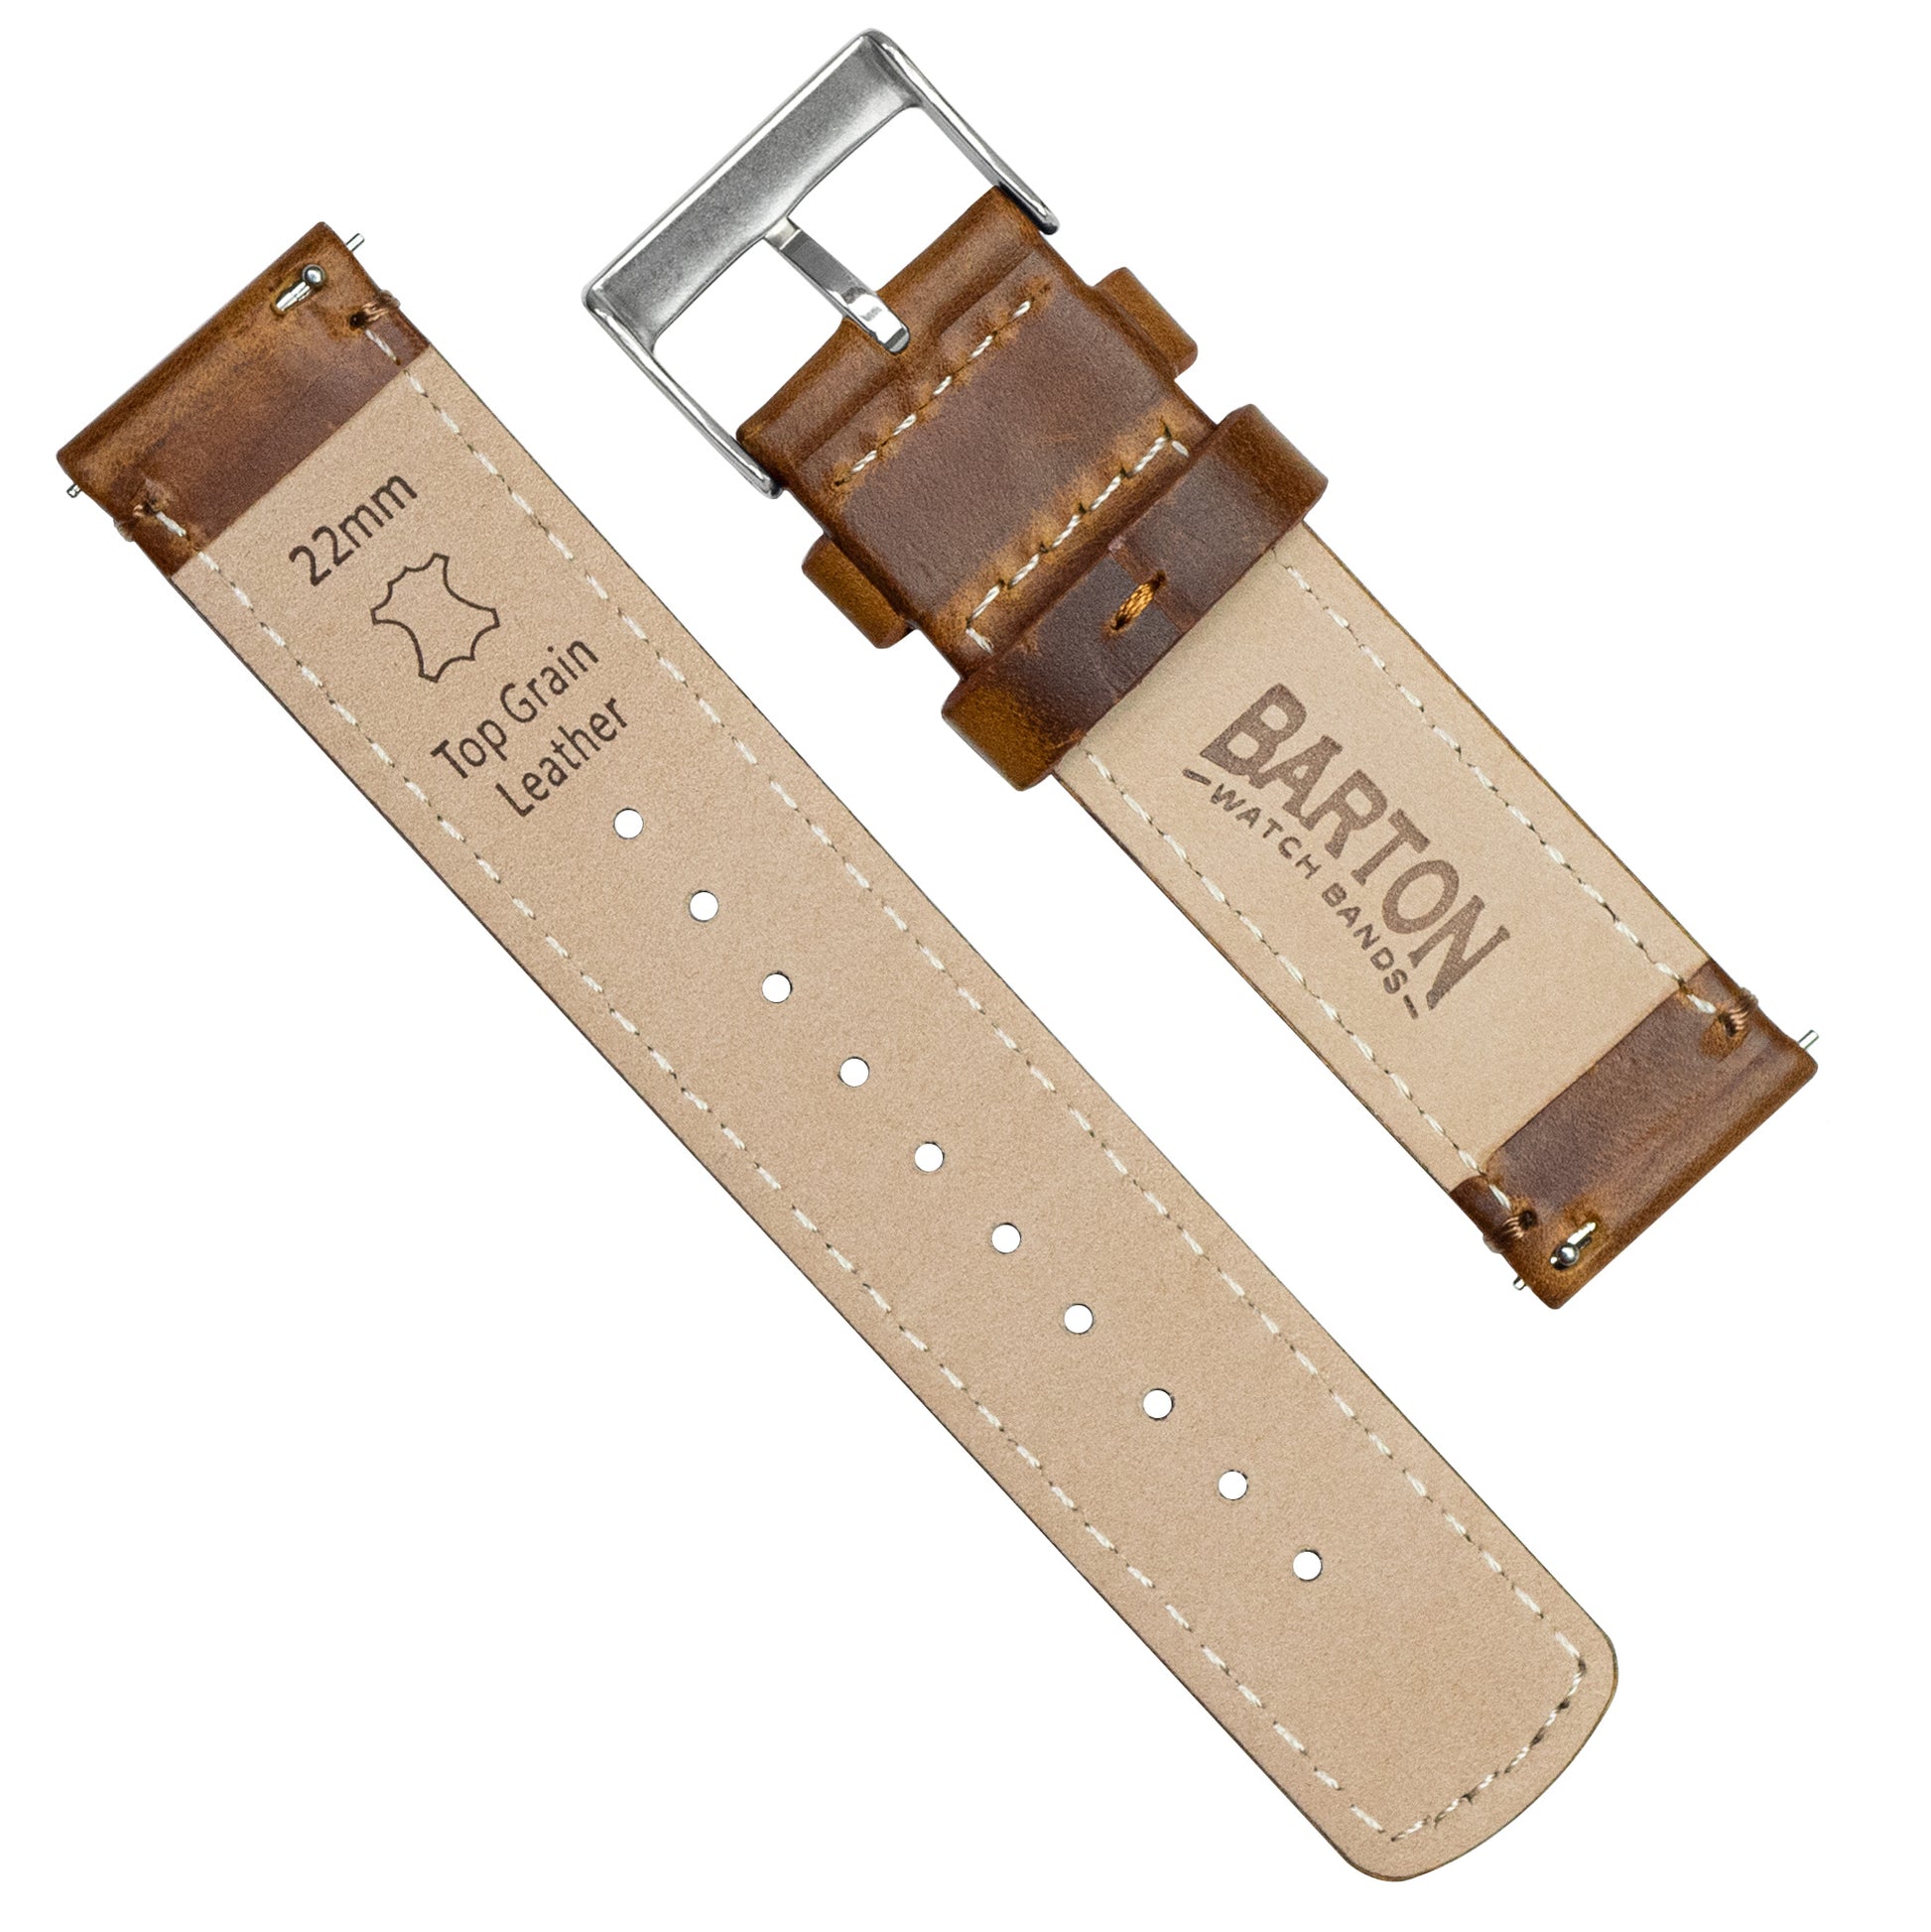 Samsung Galaxy Watch Active 2 | Weathered Brown Leather - Barton Watch Bands